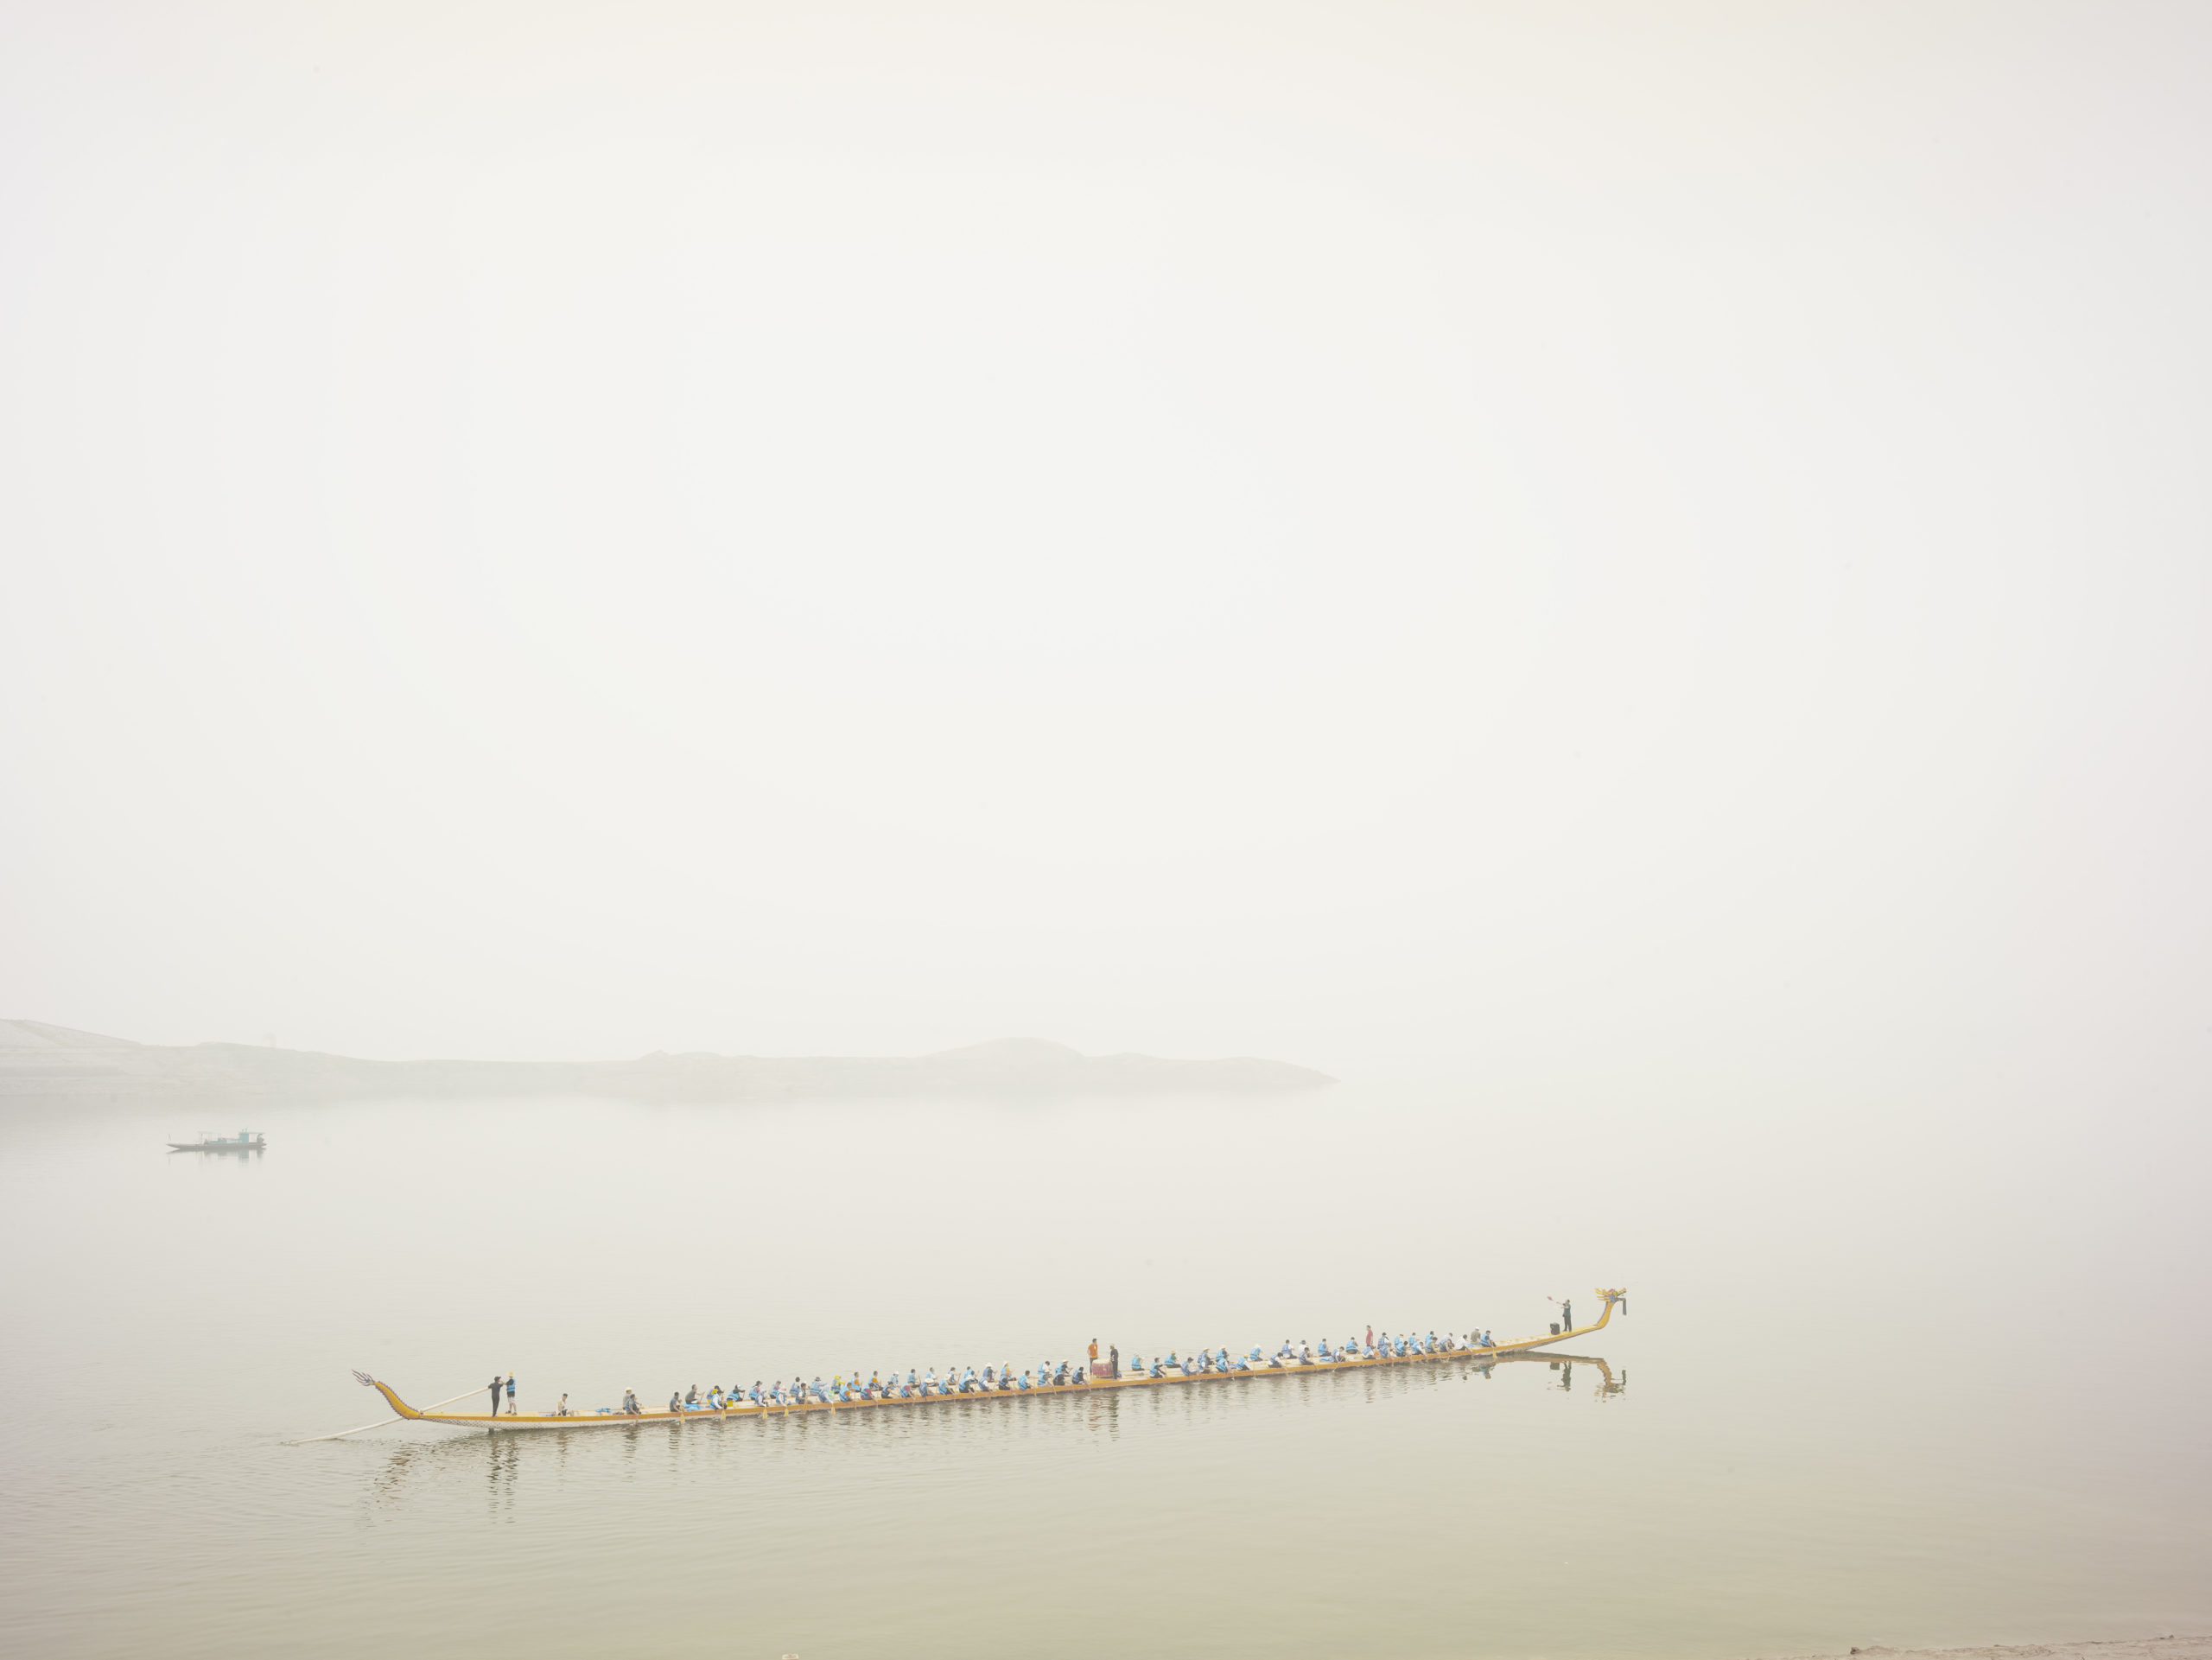 Zhang Kechun, Dragon Boat in the Three Gorges